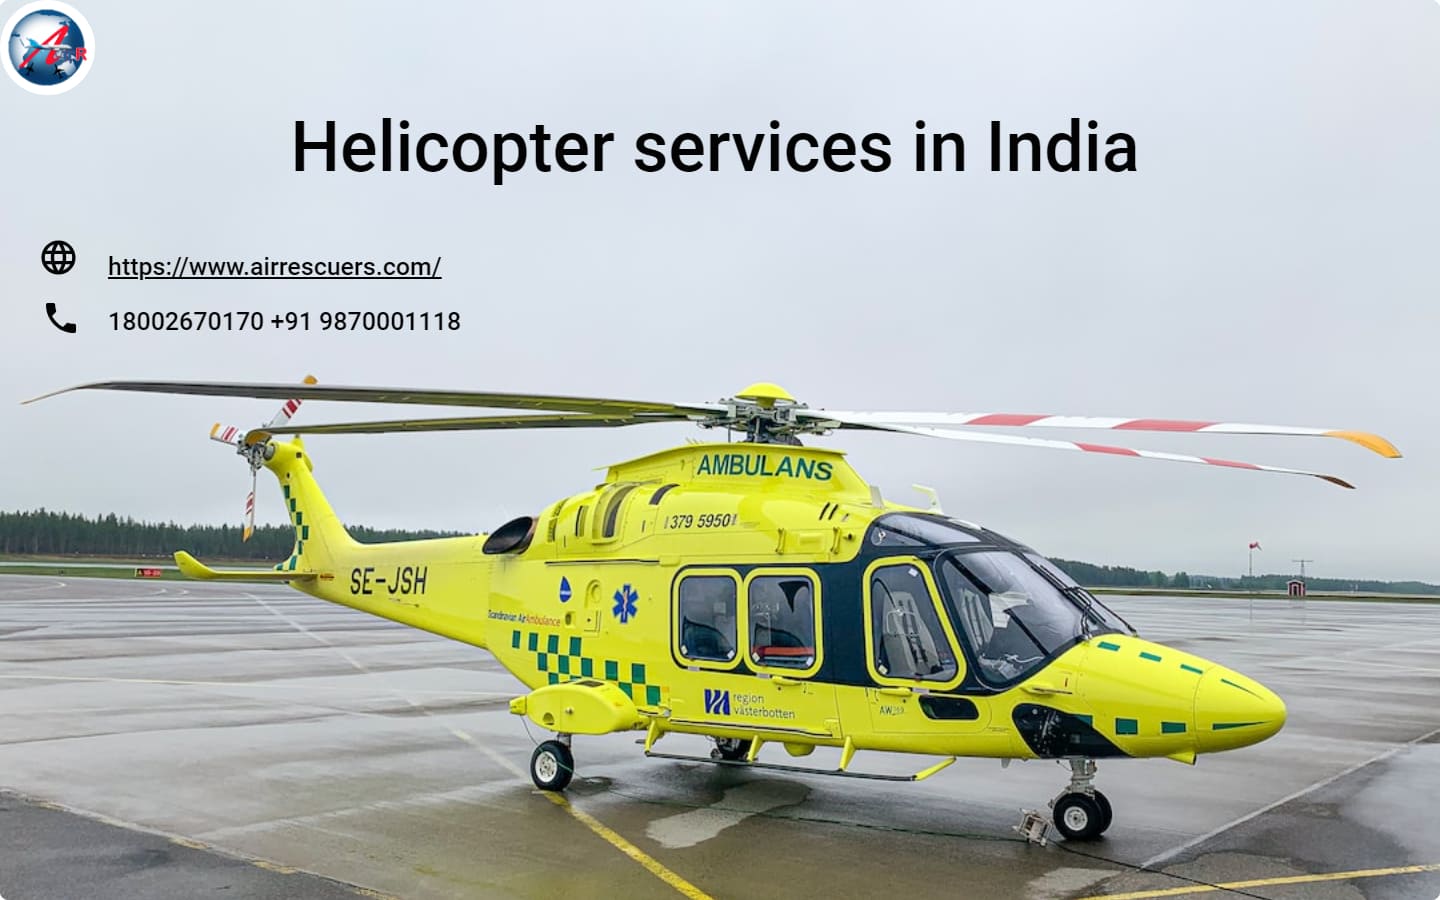 Helicopter services in India